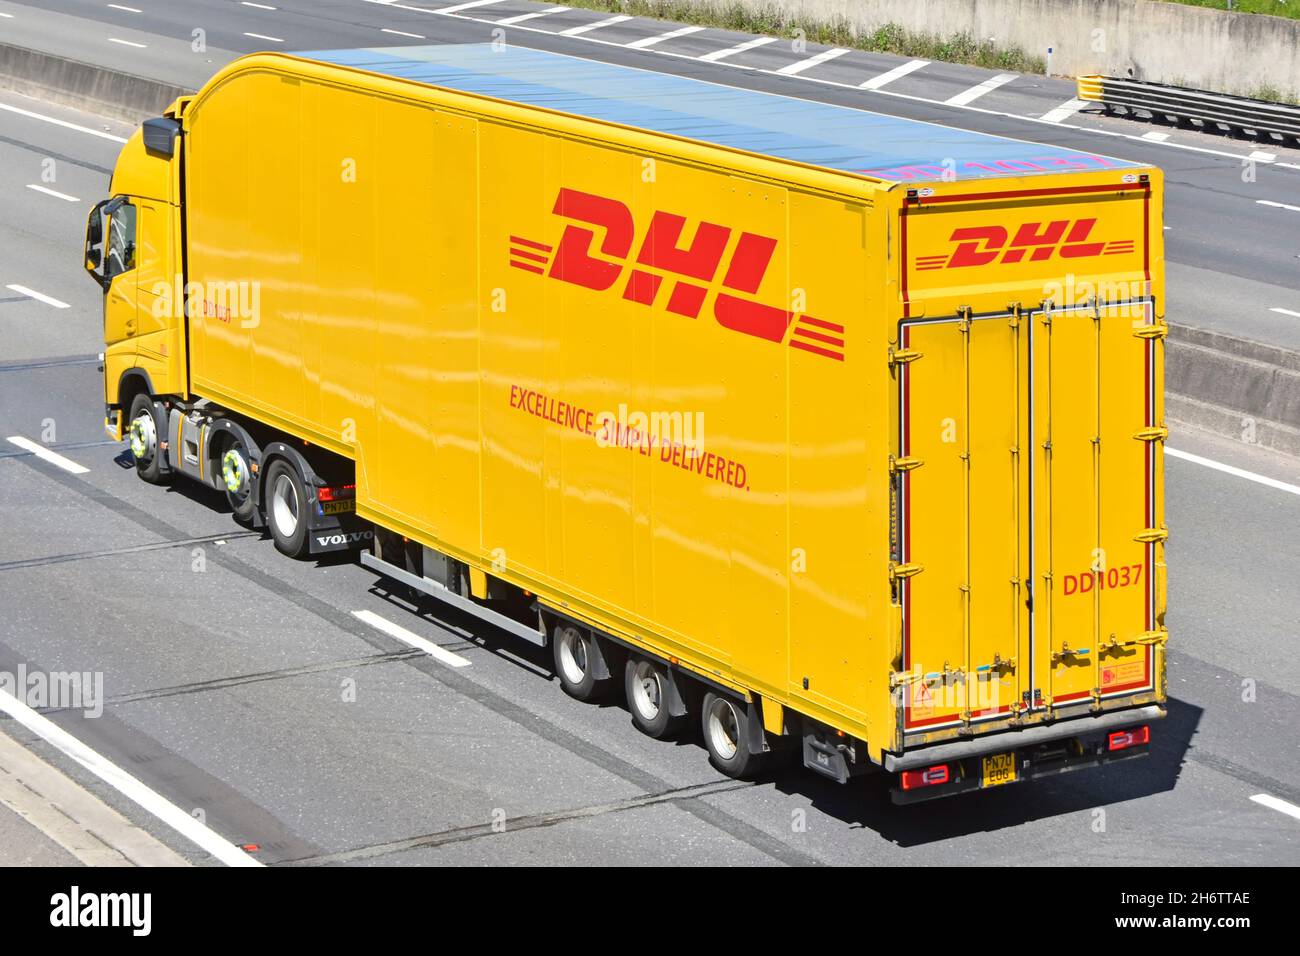 Back & side view DHL lorry truck & trailer an international courier package delivery express mail logistics supply chain business brand on uk motorway Stock Photo